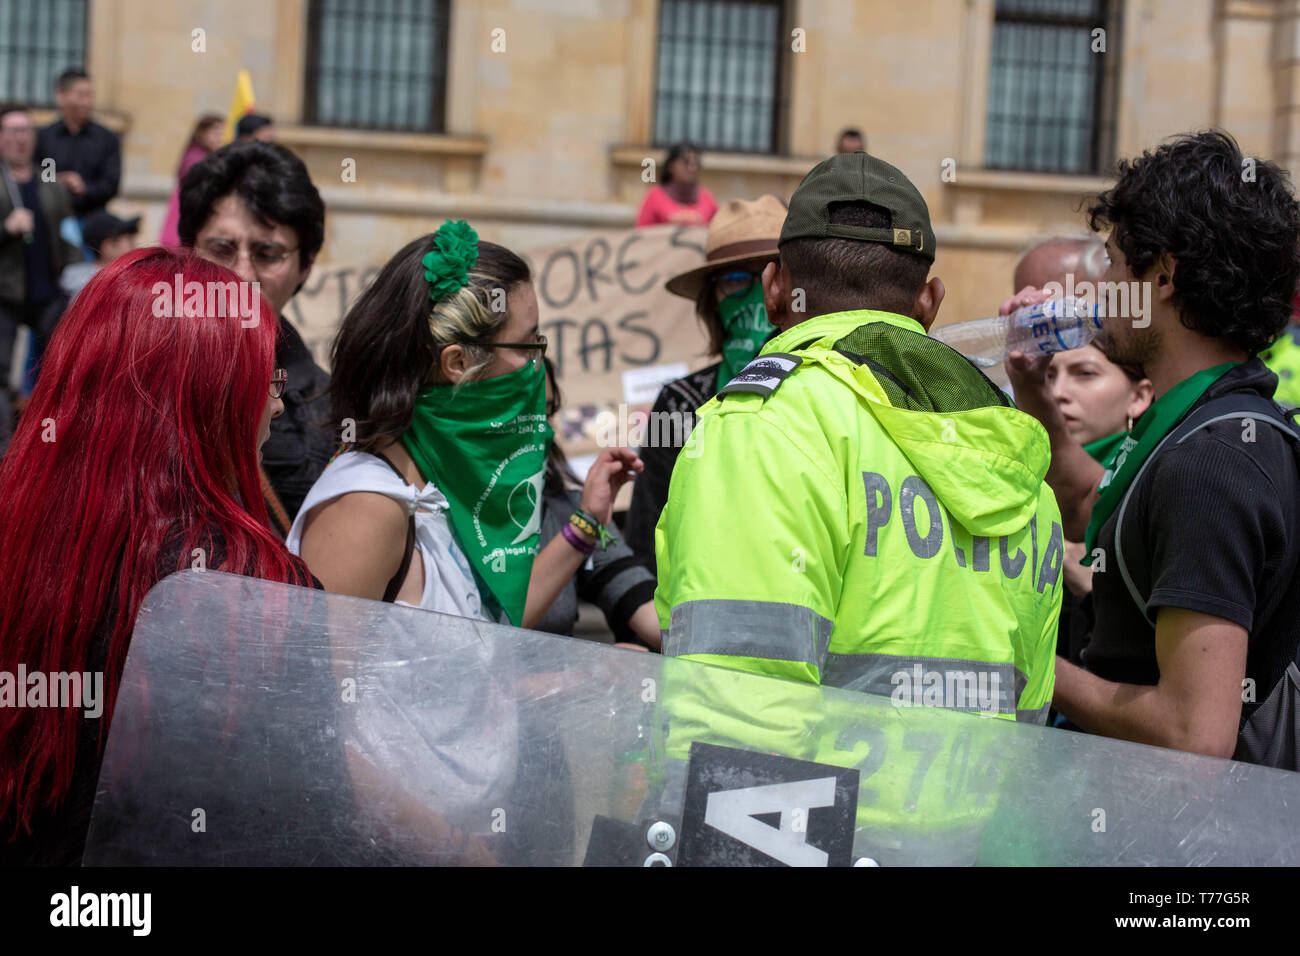 Bogota, Colombia. 04th May, 2019. The police talks to a feminist and pro choice group to keep order during the ''Unidos por la vida'' (United for Life) Pro life rally in Bogota.Under the slogan ''I choose the two lives'' around 500 people demonstrated for the maintenance of traditional family values, against abortion and the killing of social leaders in the country. Catholic and right wing political groups joined the call of the ''United for Life'' Platform (Unidos por la Vida) a widely spread organization in Colombia. Credit: ZUMA Press, Inc./Alamy Live News Stock Photo